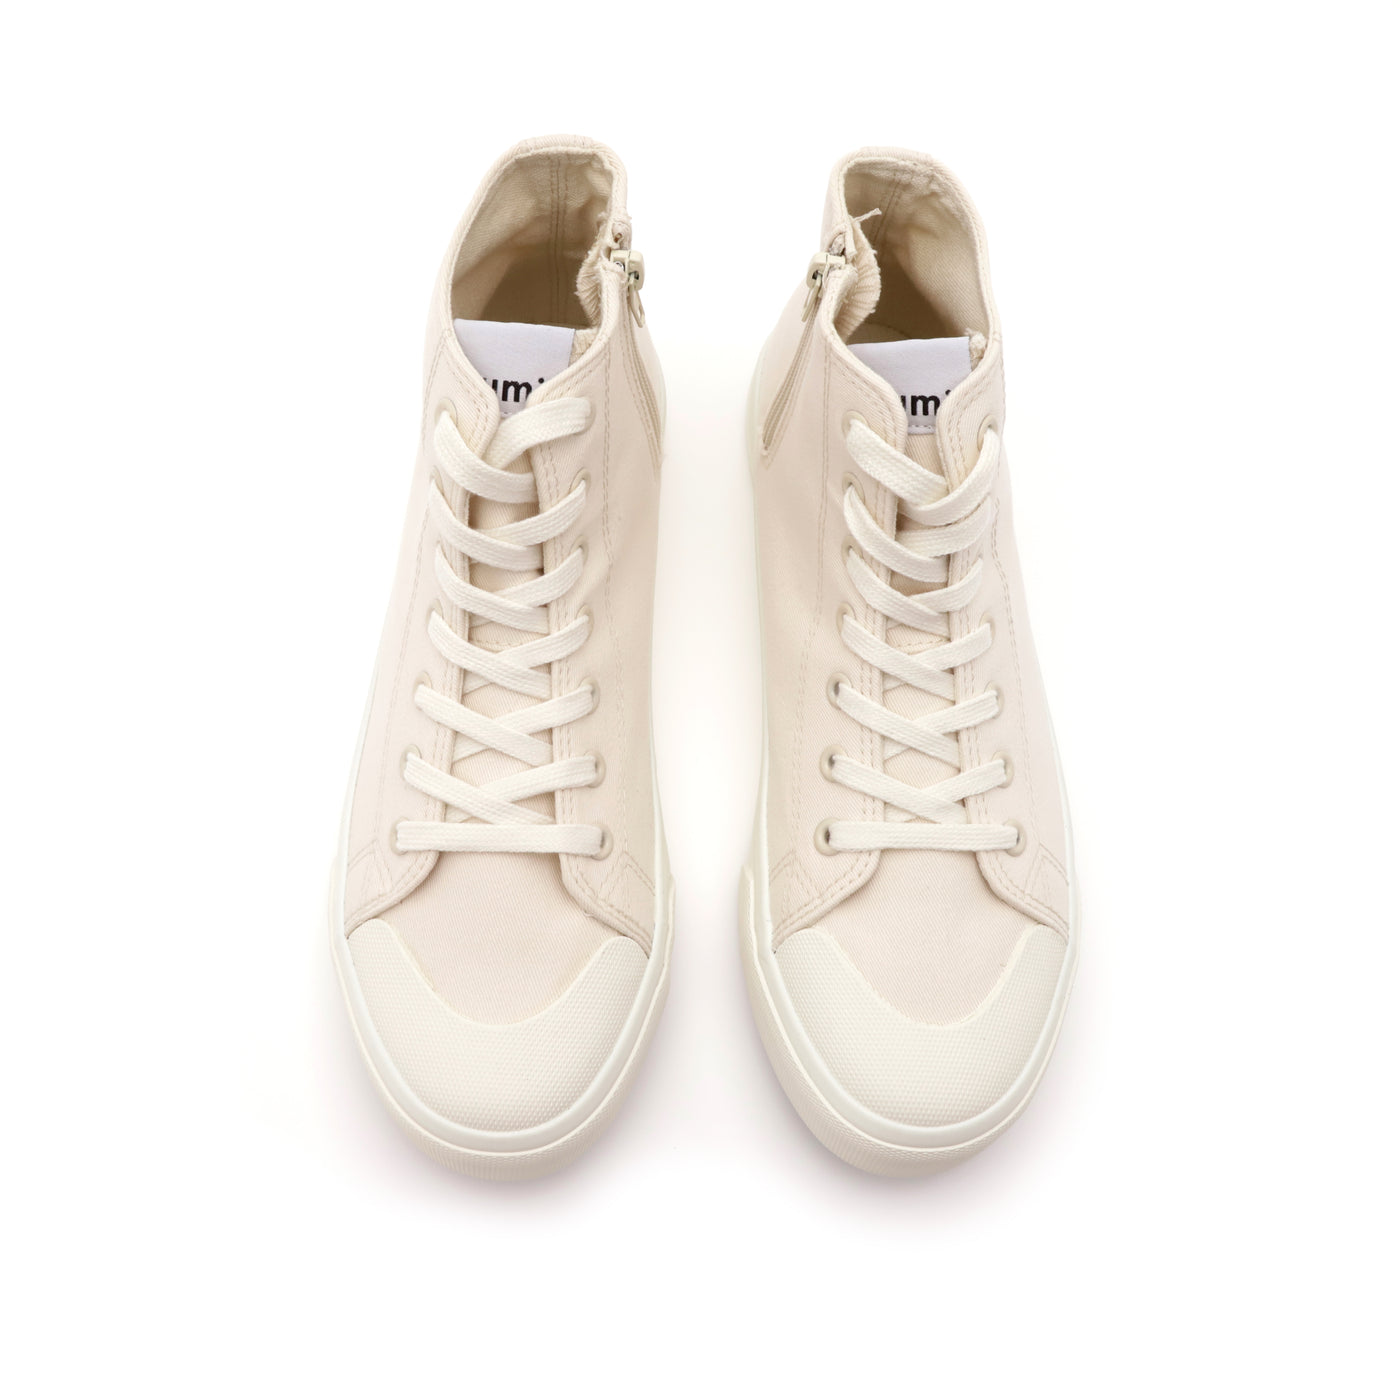 Off-white high top sneakers